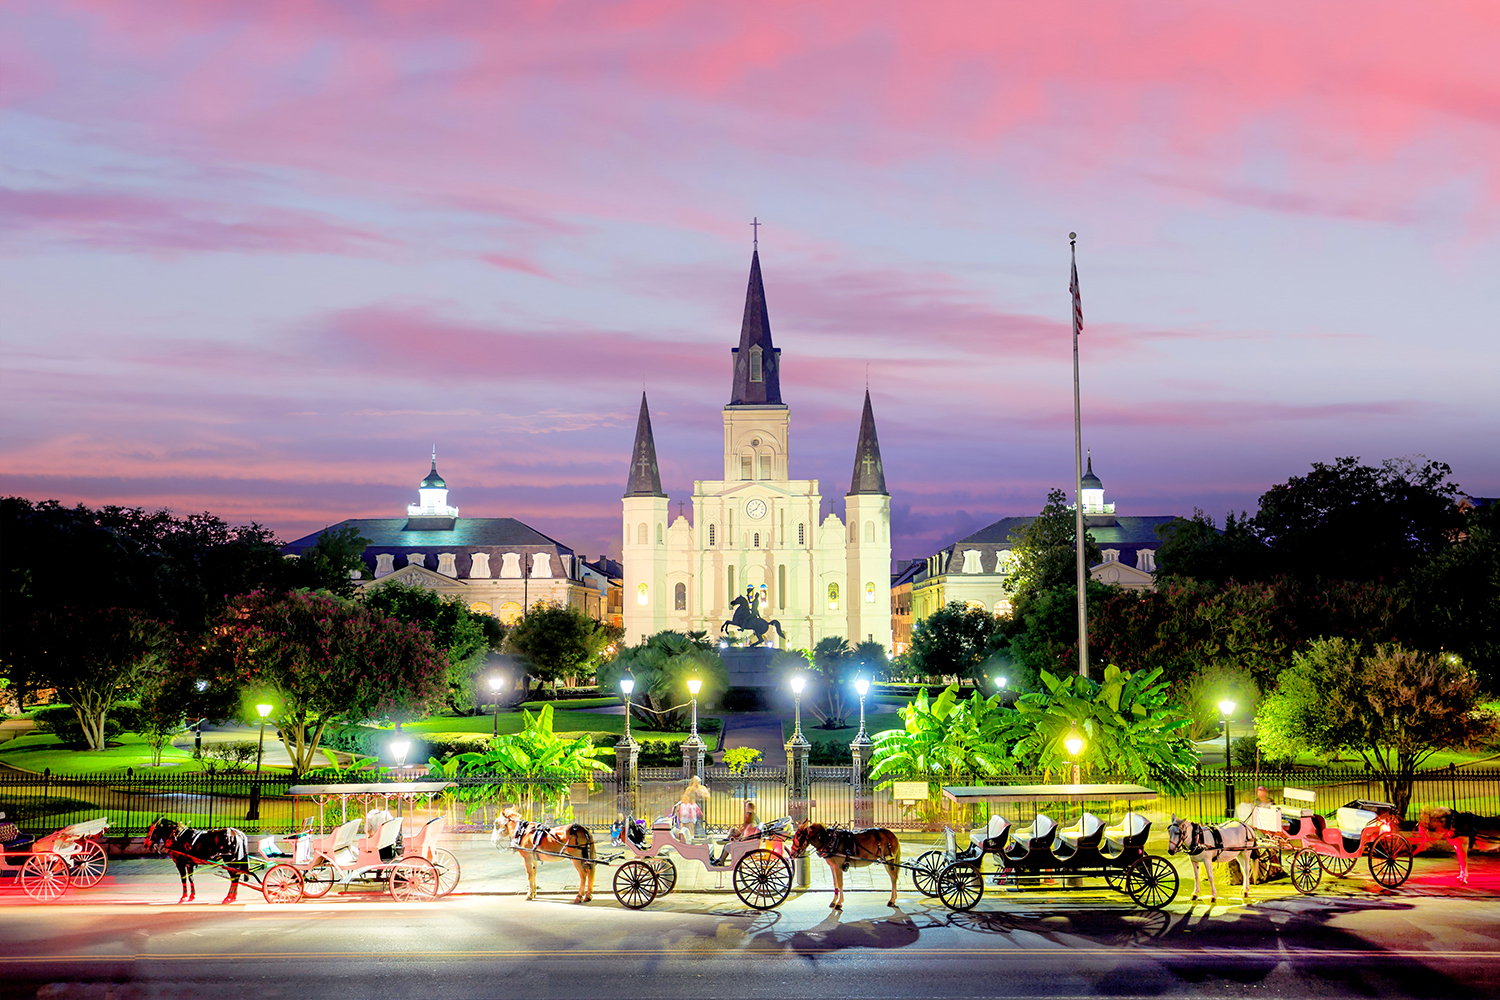 Sunset over an elegant cathedral with horse carriages in foreground.